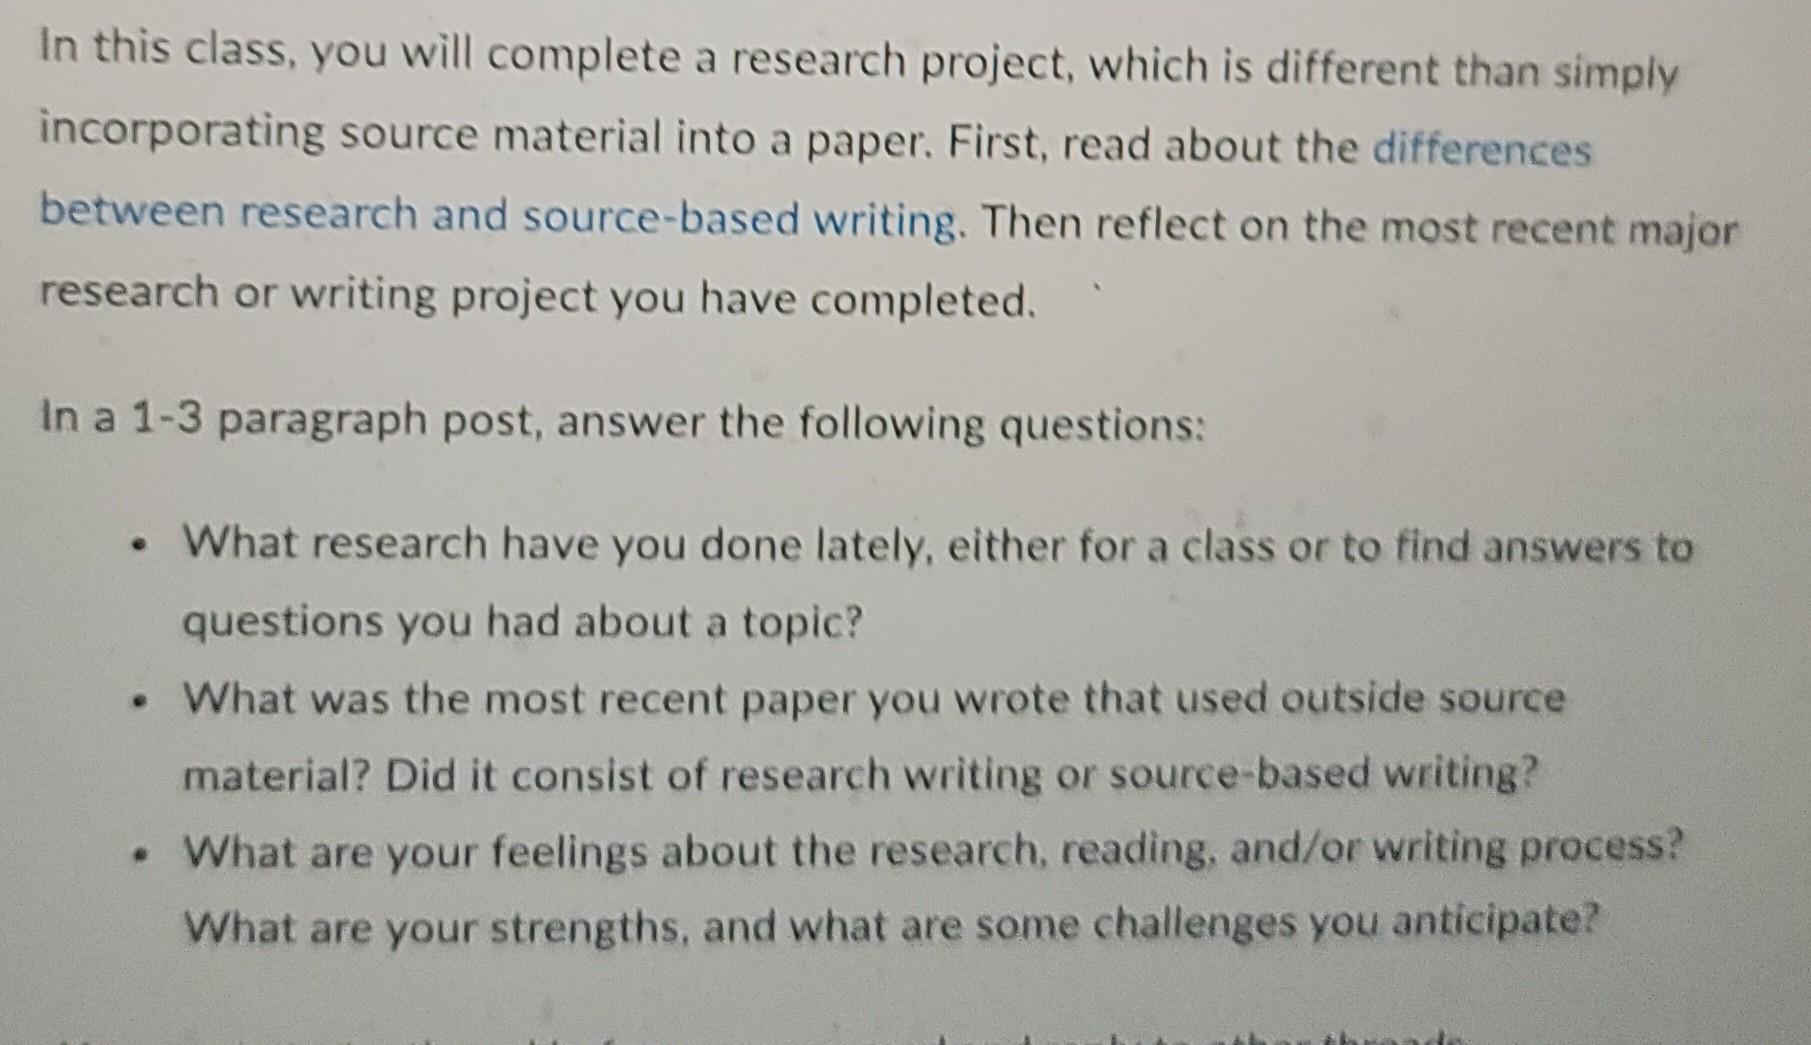 write a research project based from the different lessons in this module